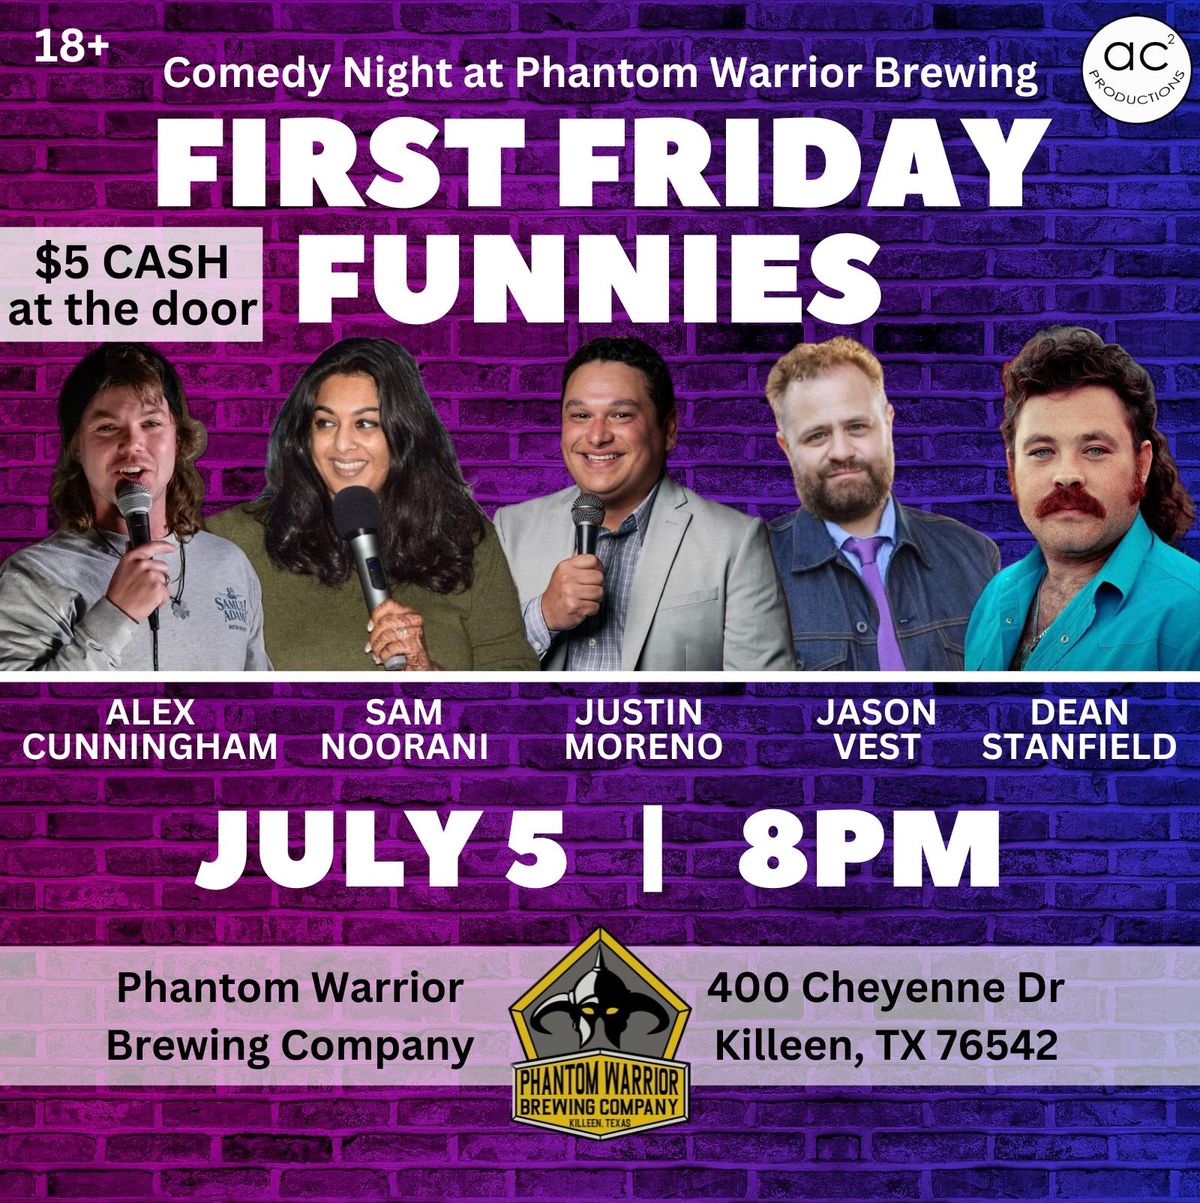 First Friday Funnies: Comedy Night at PWBC